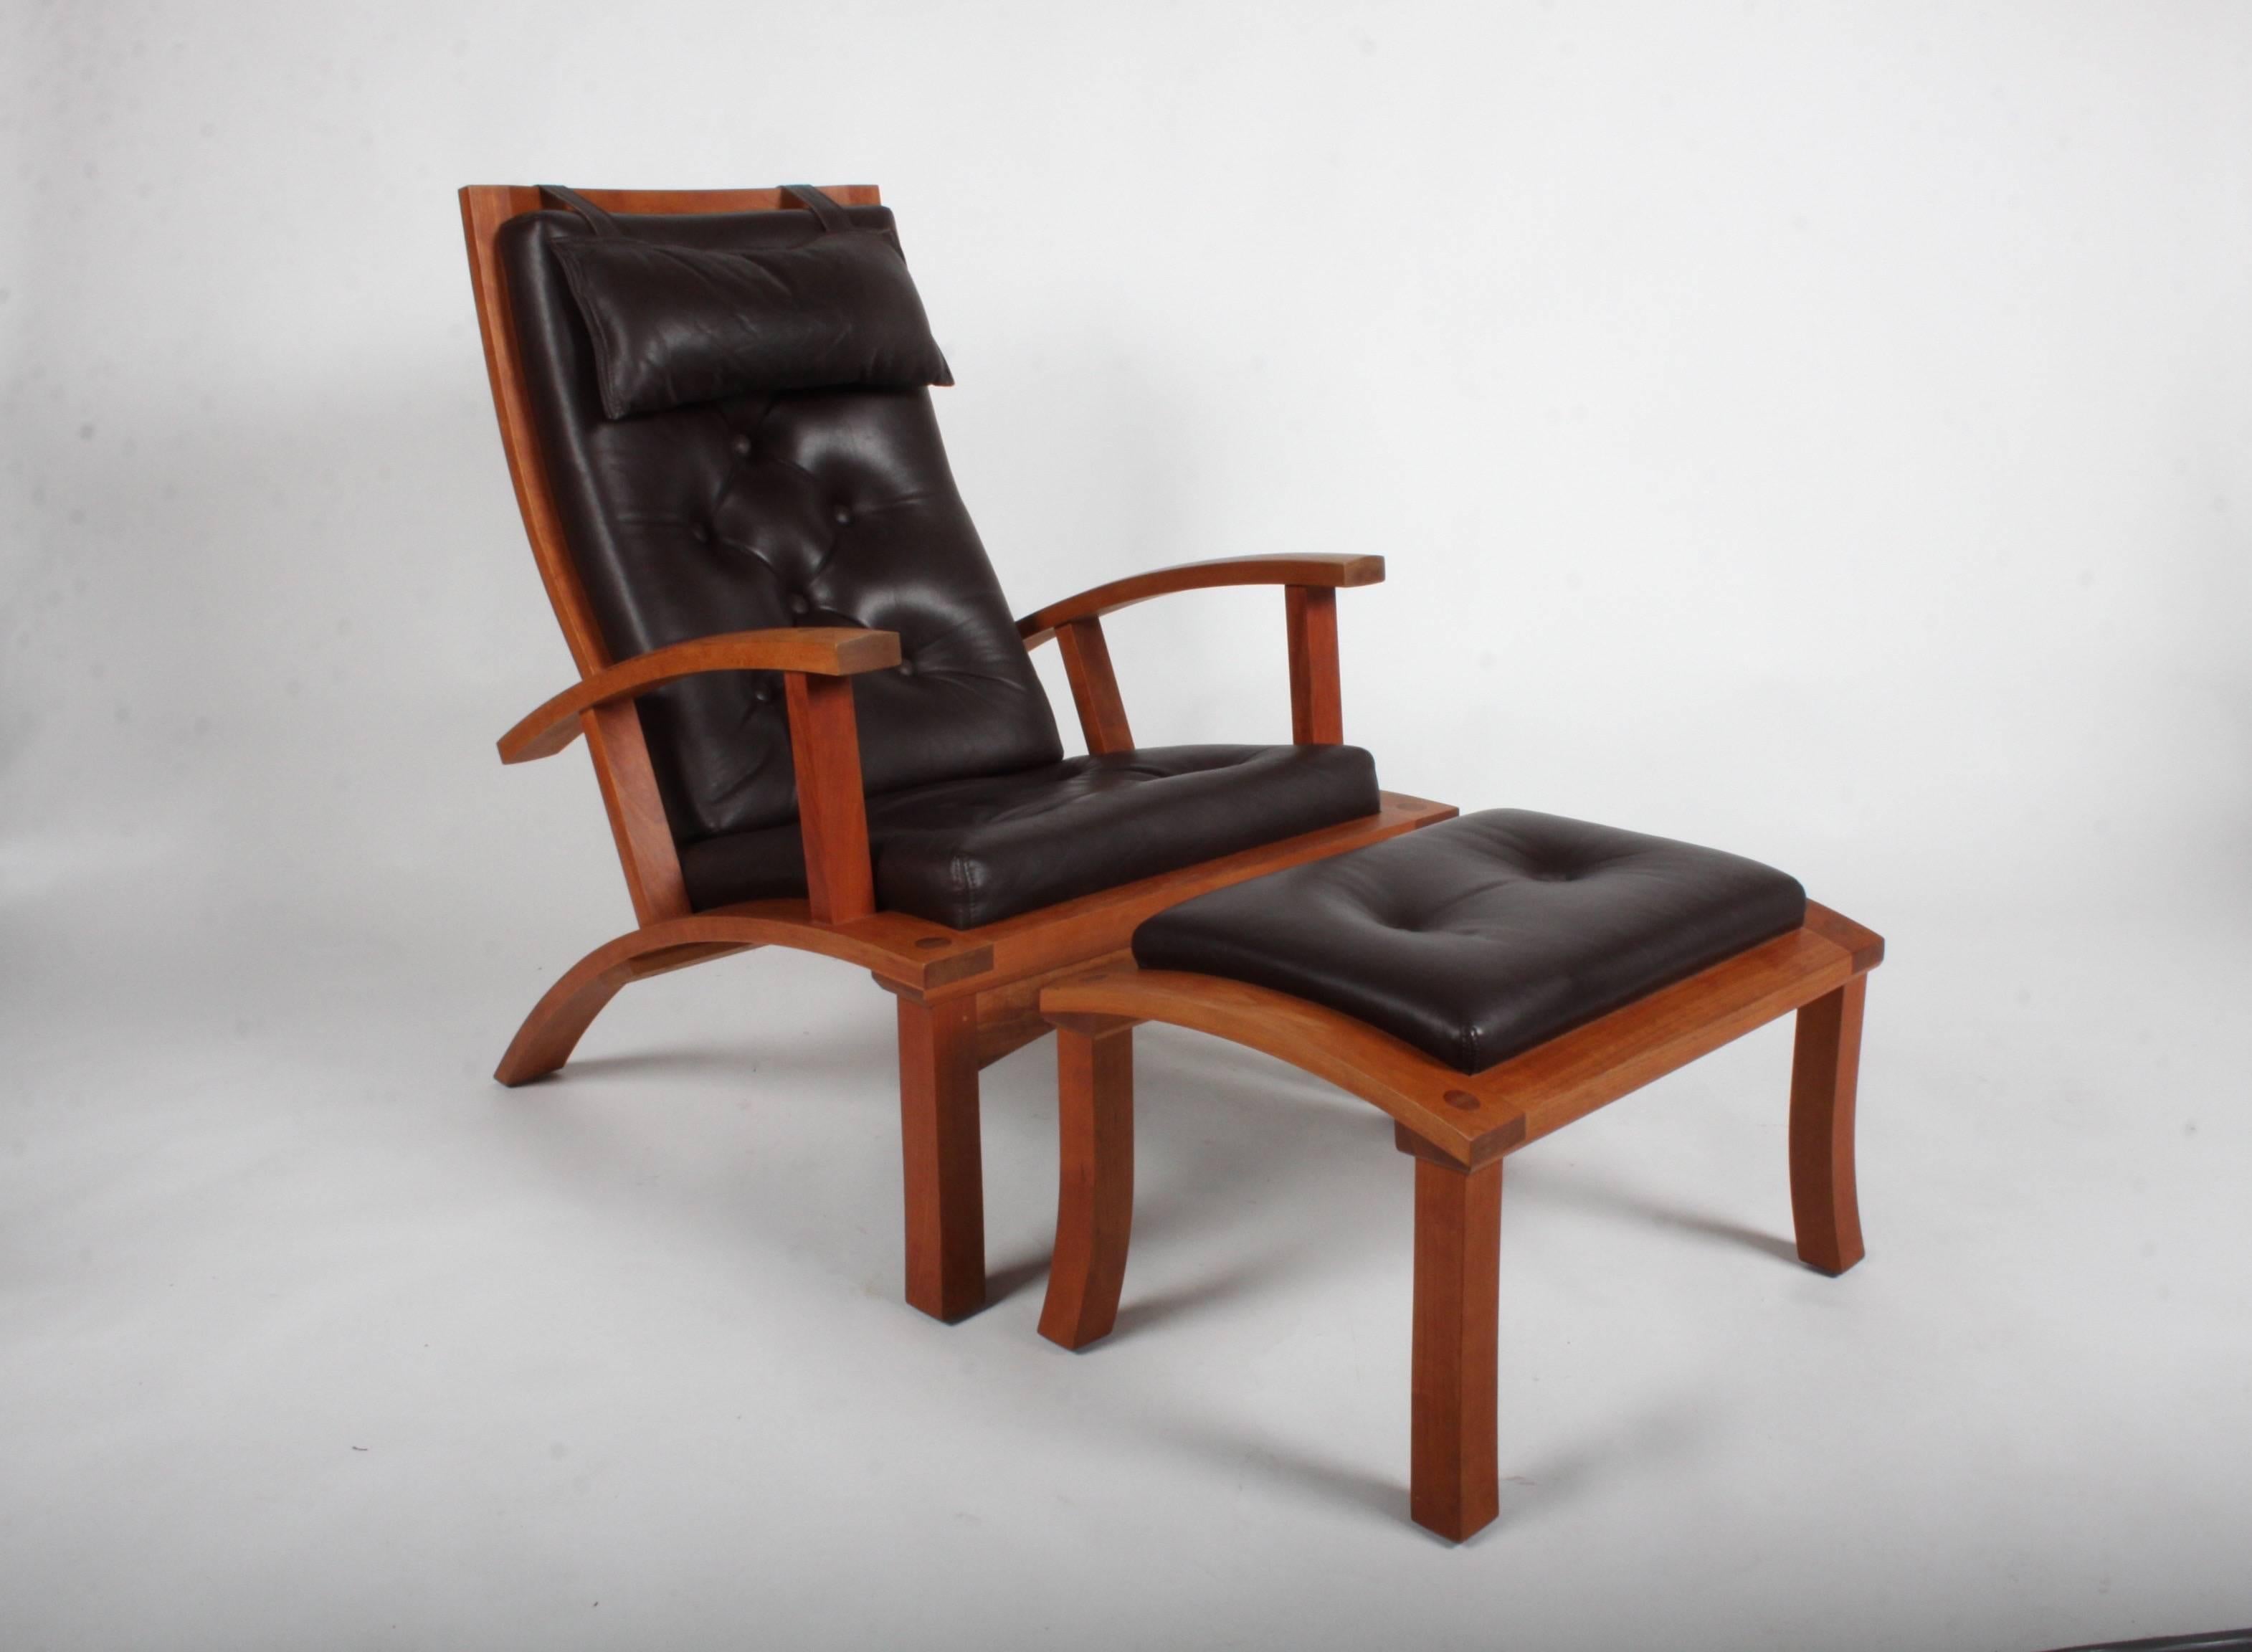 Thos. Moser Lolling adjustable lounge and ottoman in cherry with brown tufted leather. Brown leather is beautiful and shows really no signs of wear, like you would expect. Beautifully crafted in Maine. Chair signed by craftsman Ed. Ckekovsky Jr.